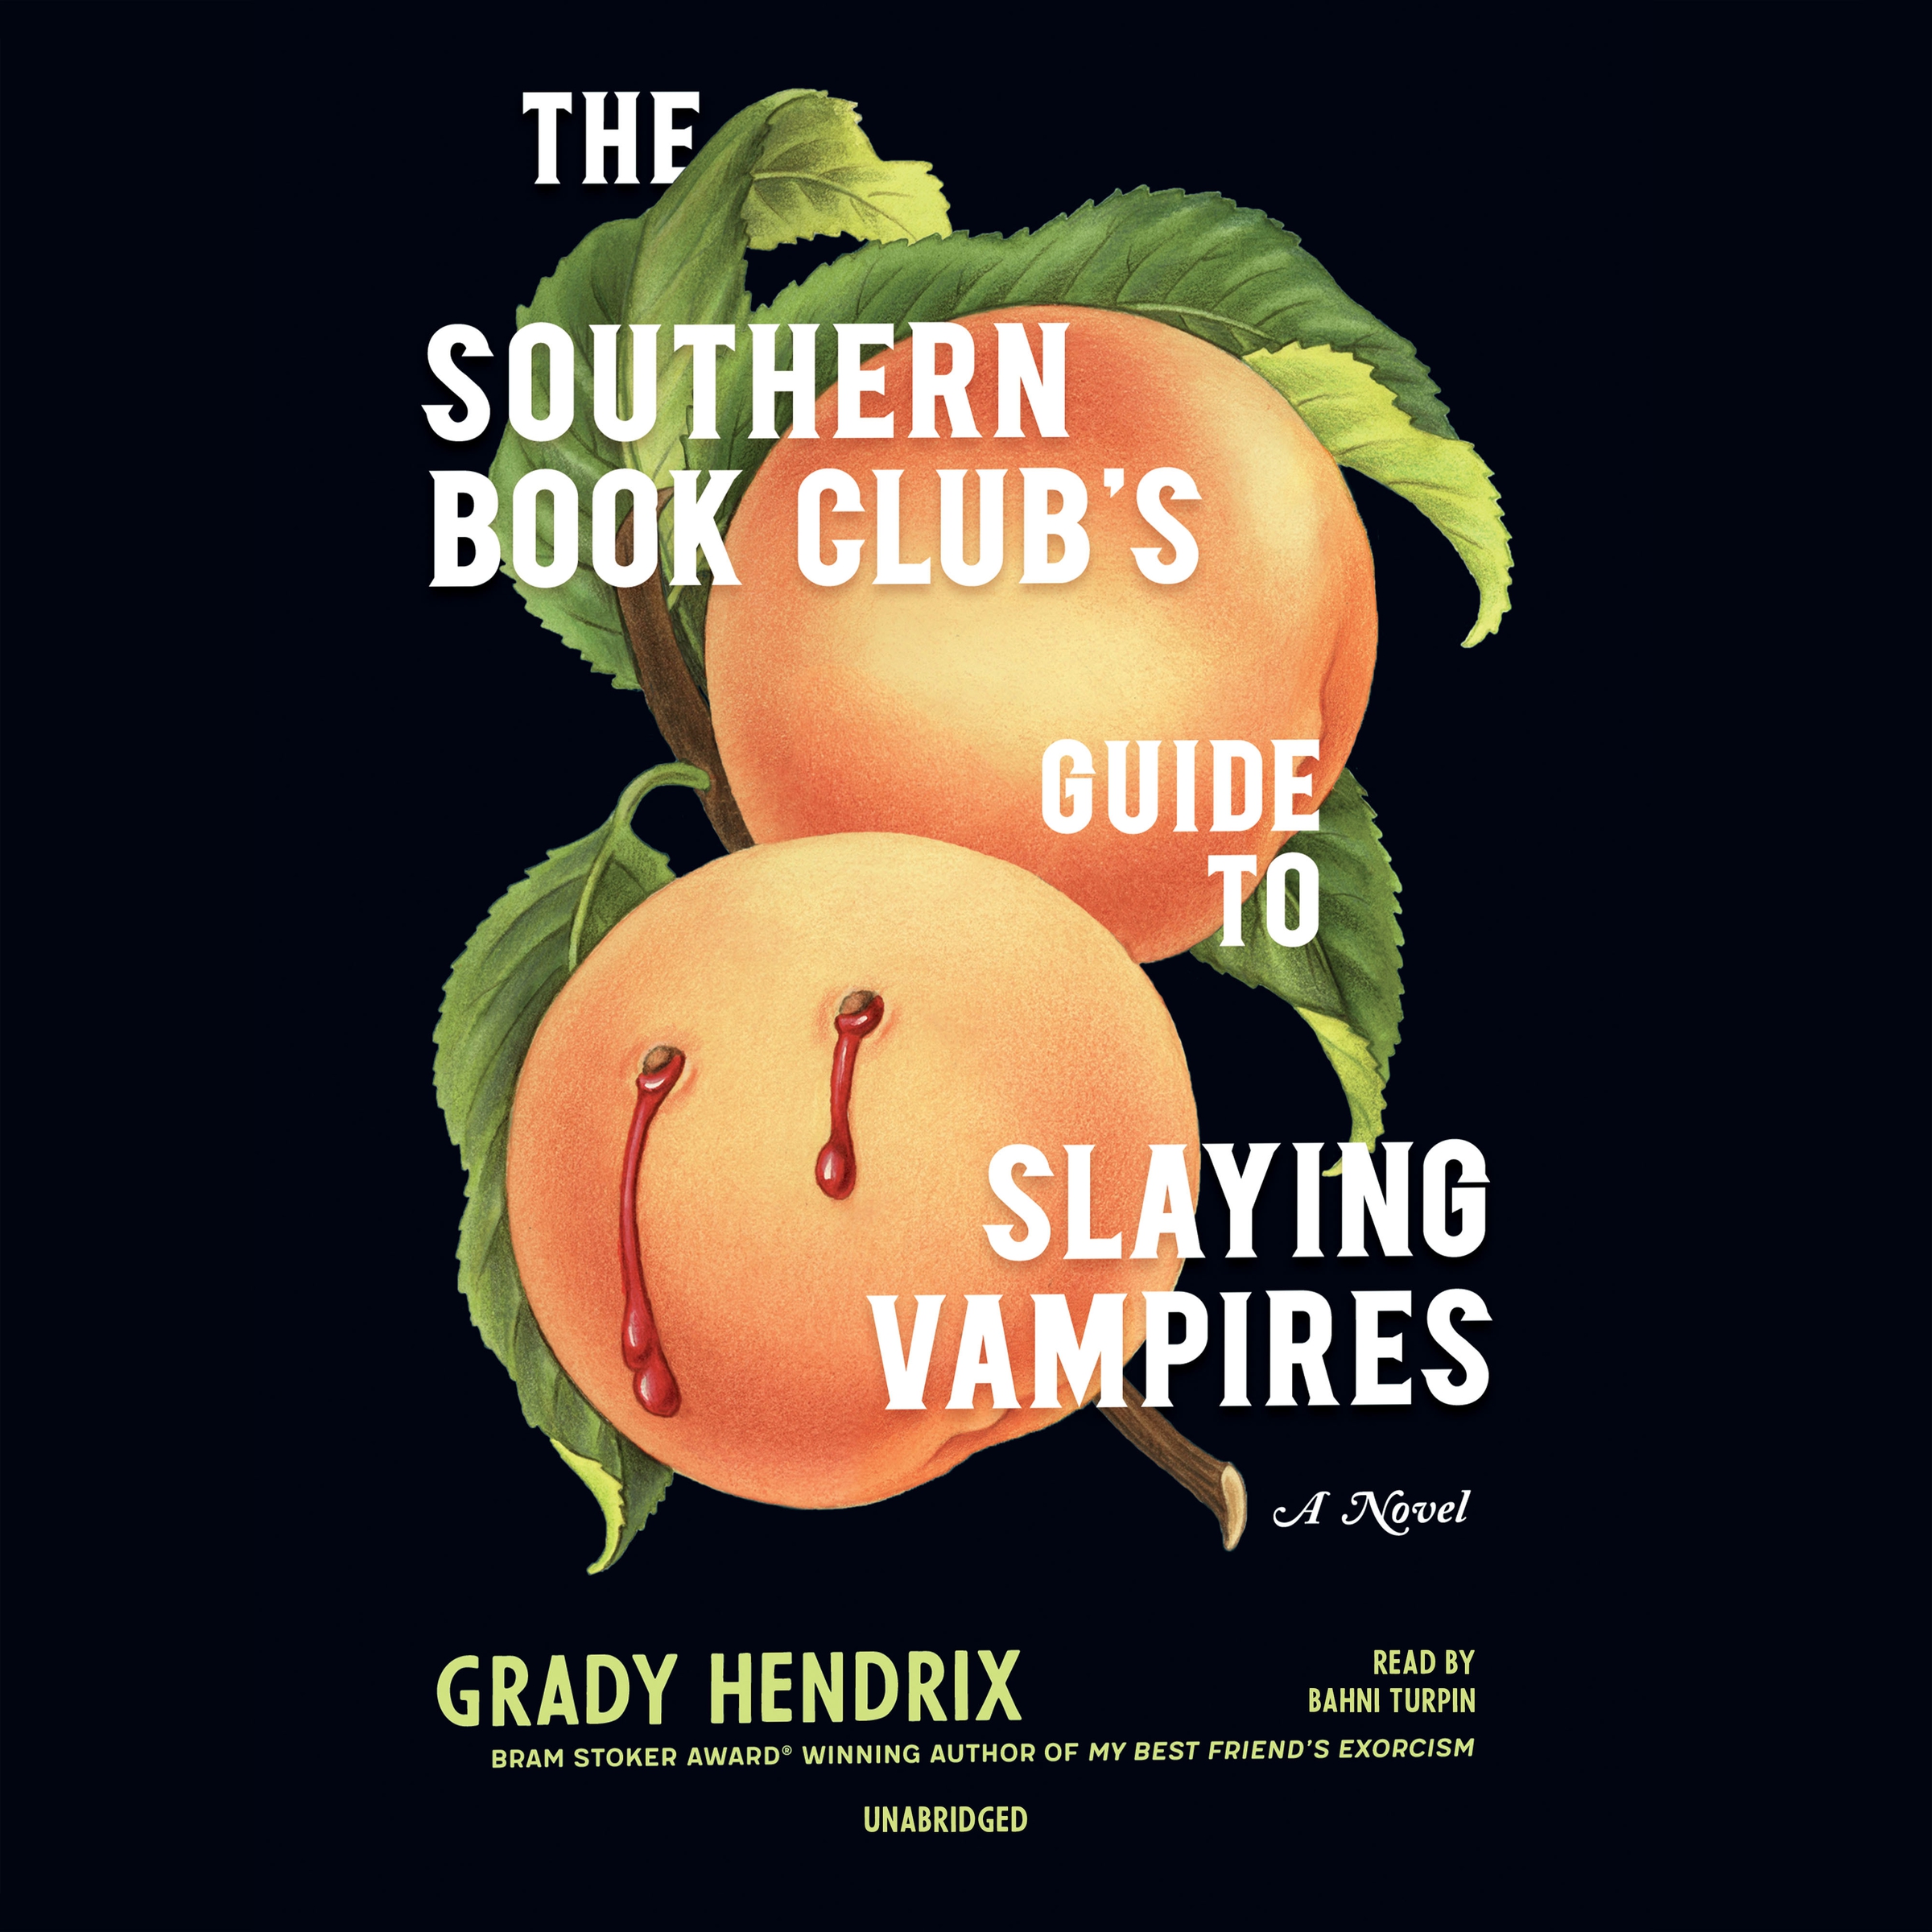 image for The Southern Book Club's Guide to Slaying Vampires